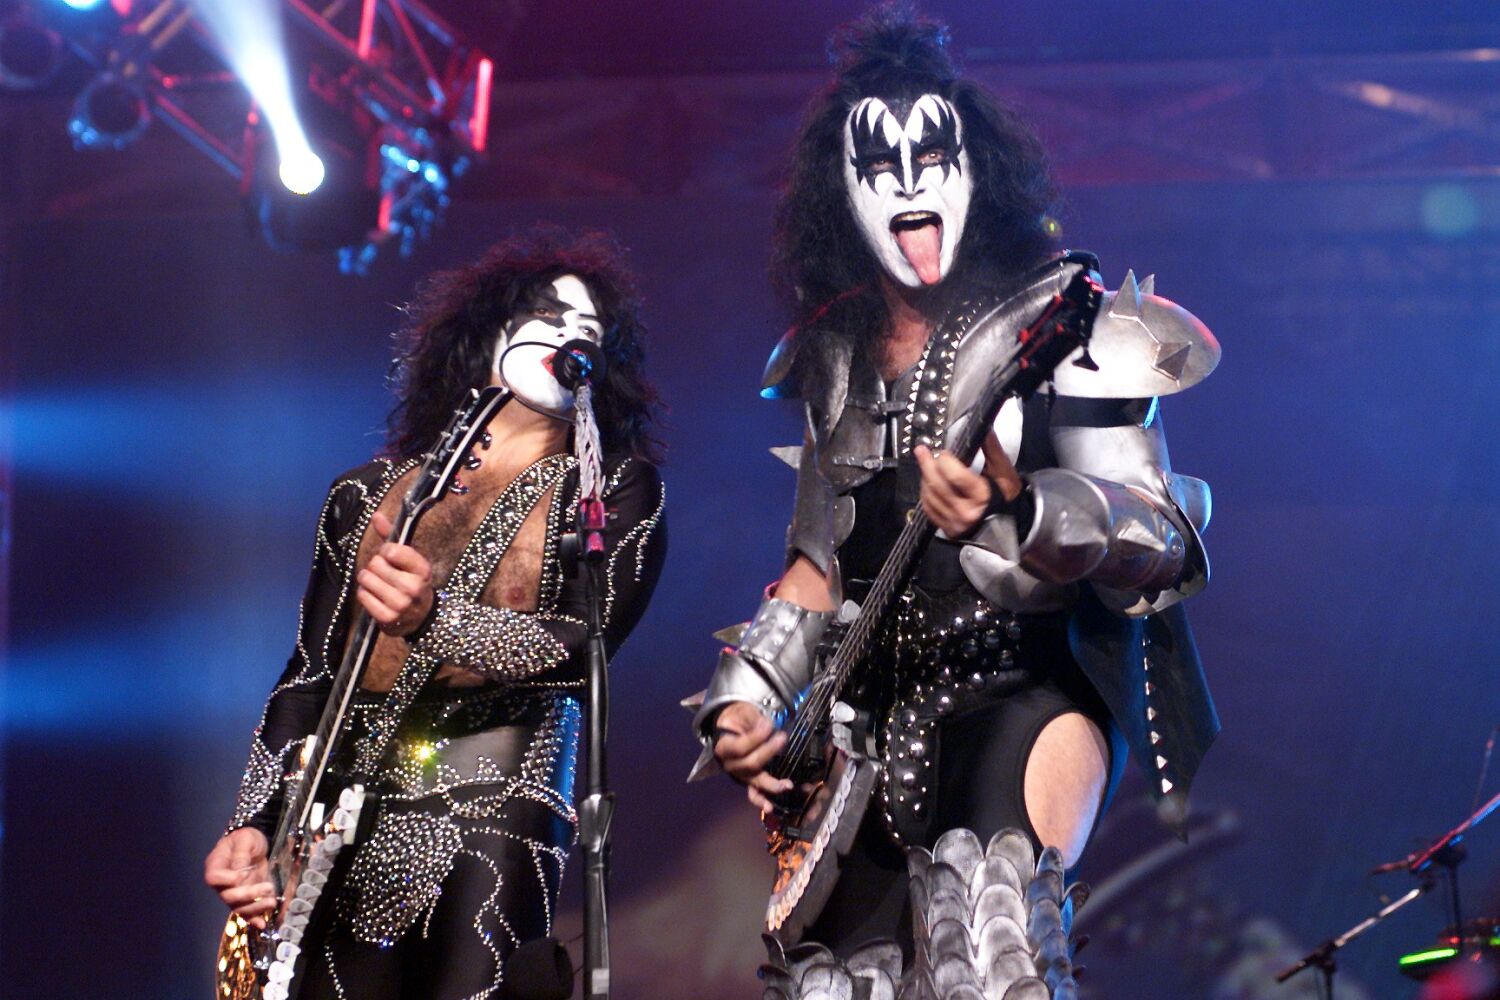 KISS announces the 'absolute final shows' of their 'End of the Road' farewell tour